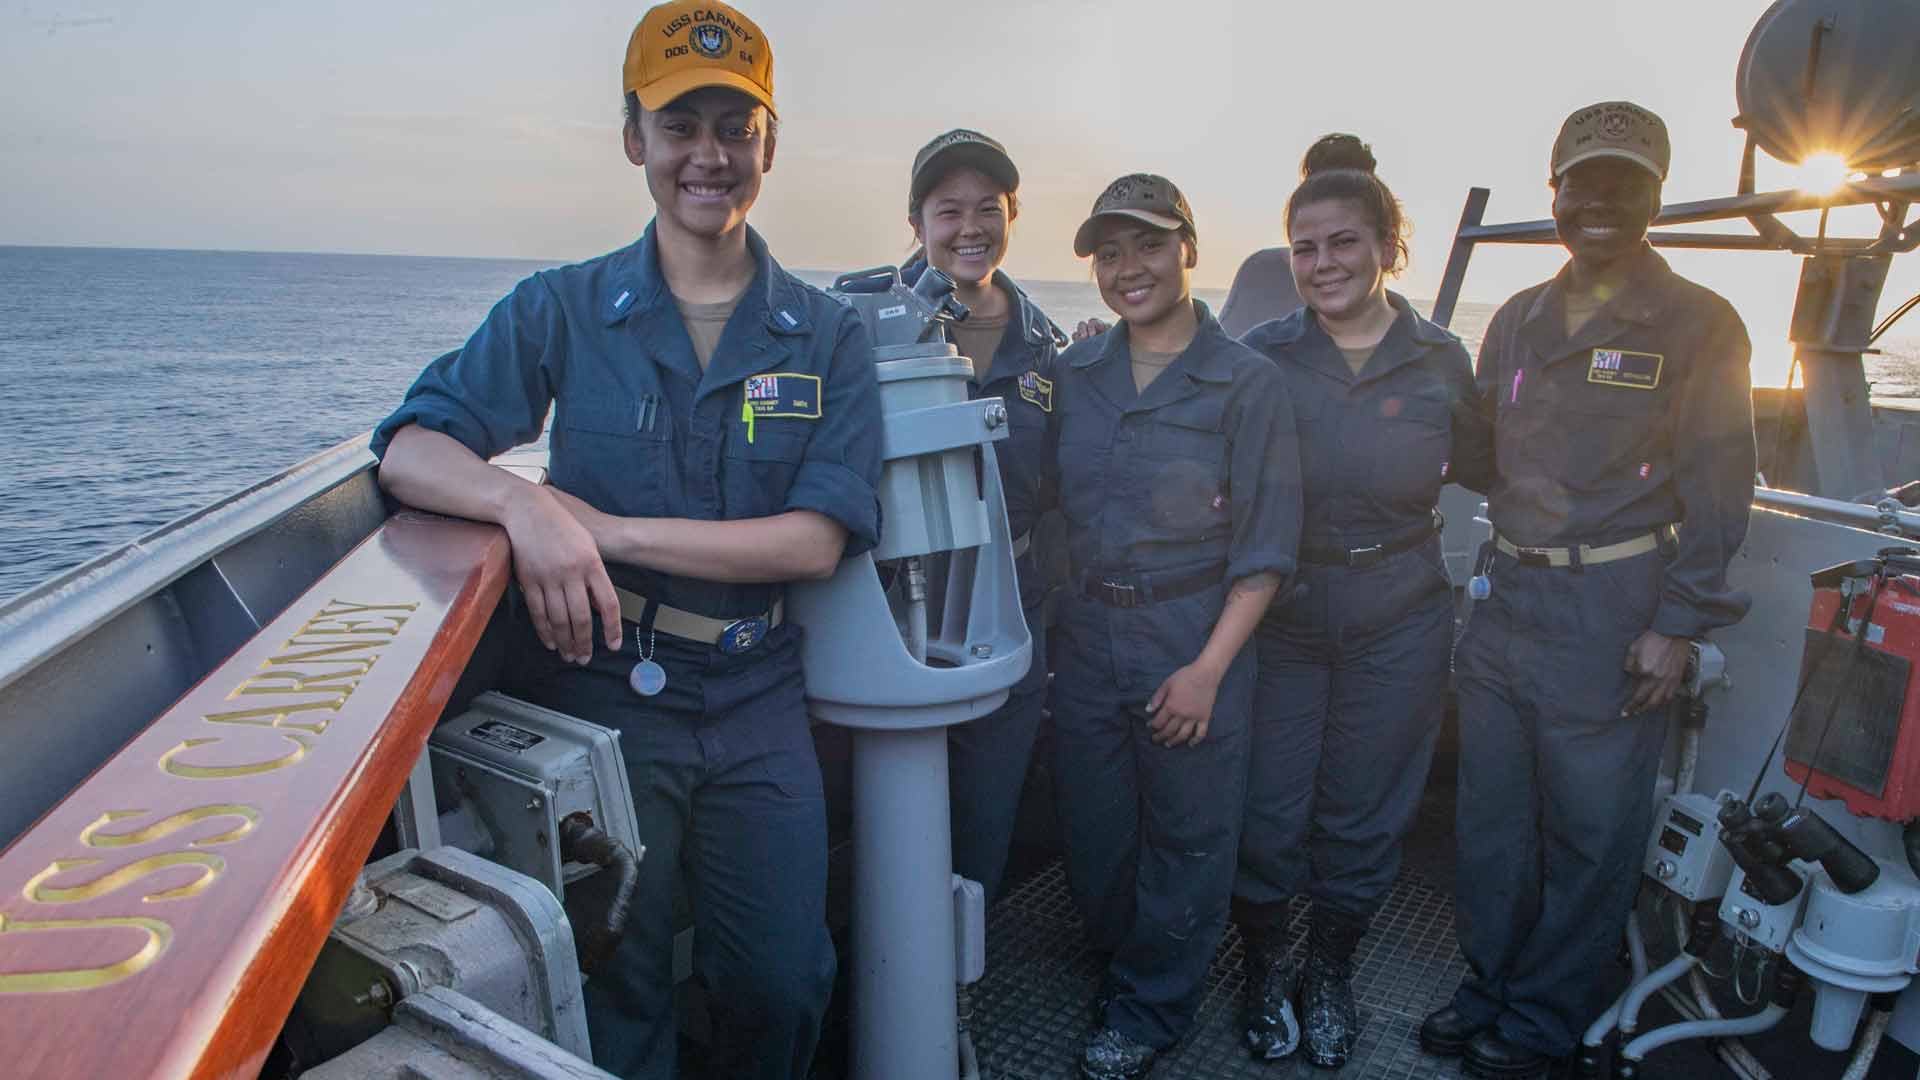 Diverse women U.S. Navy Sailors pose for a photo aboard a Navy ship while out to sea